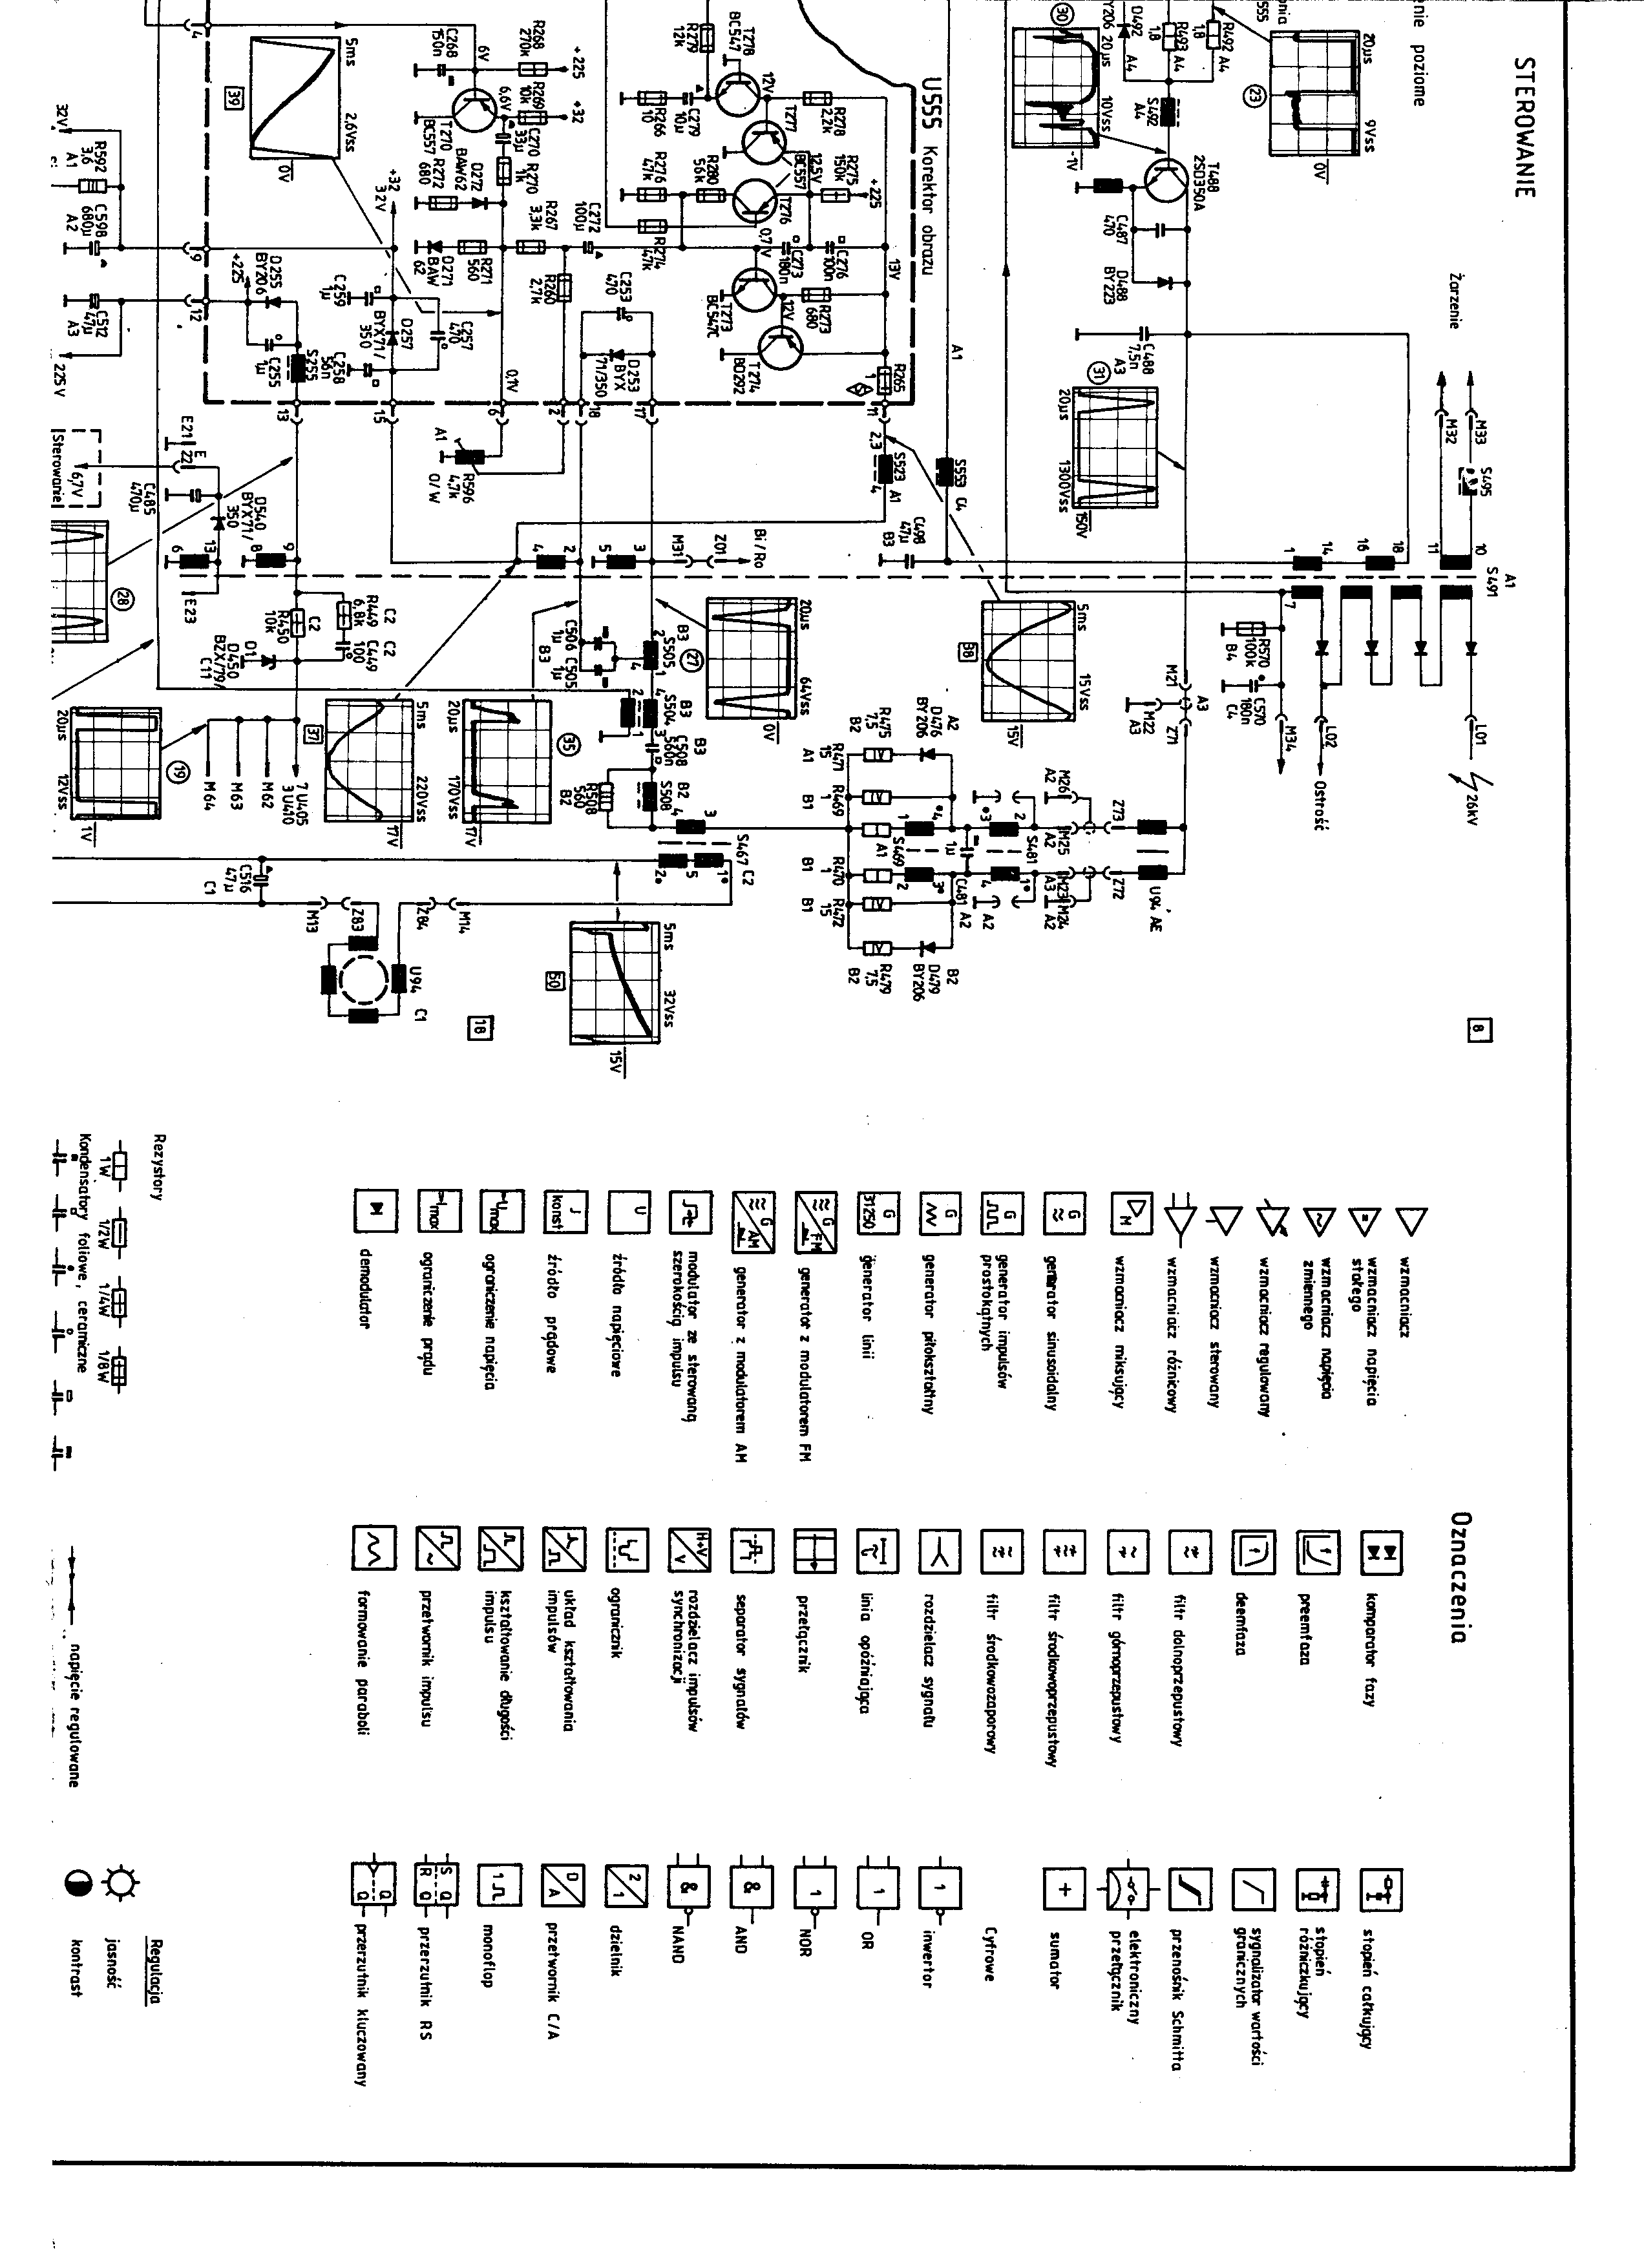 PHILIPS K12 CIRCUIT DIAGRAM
There are 8 files
Regards Hardisk